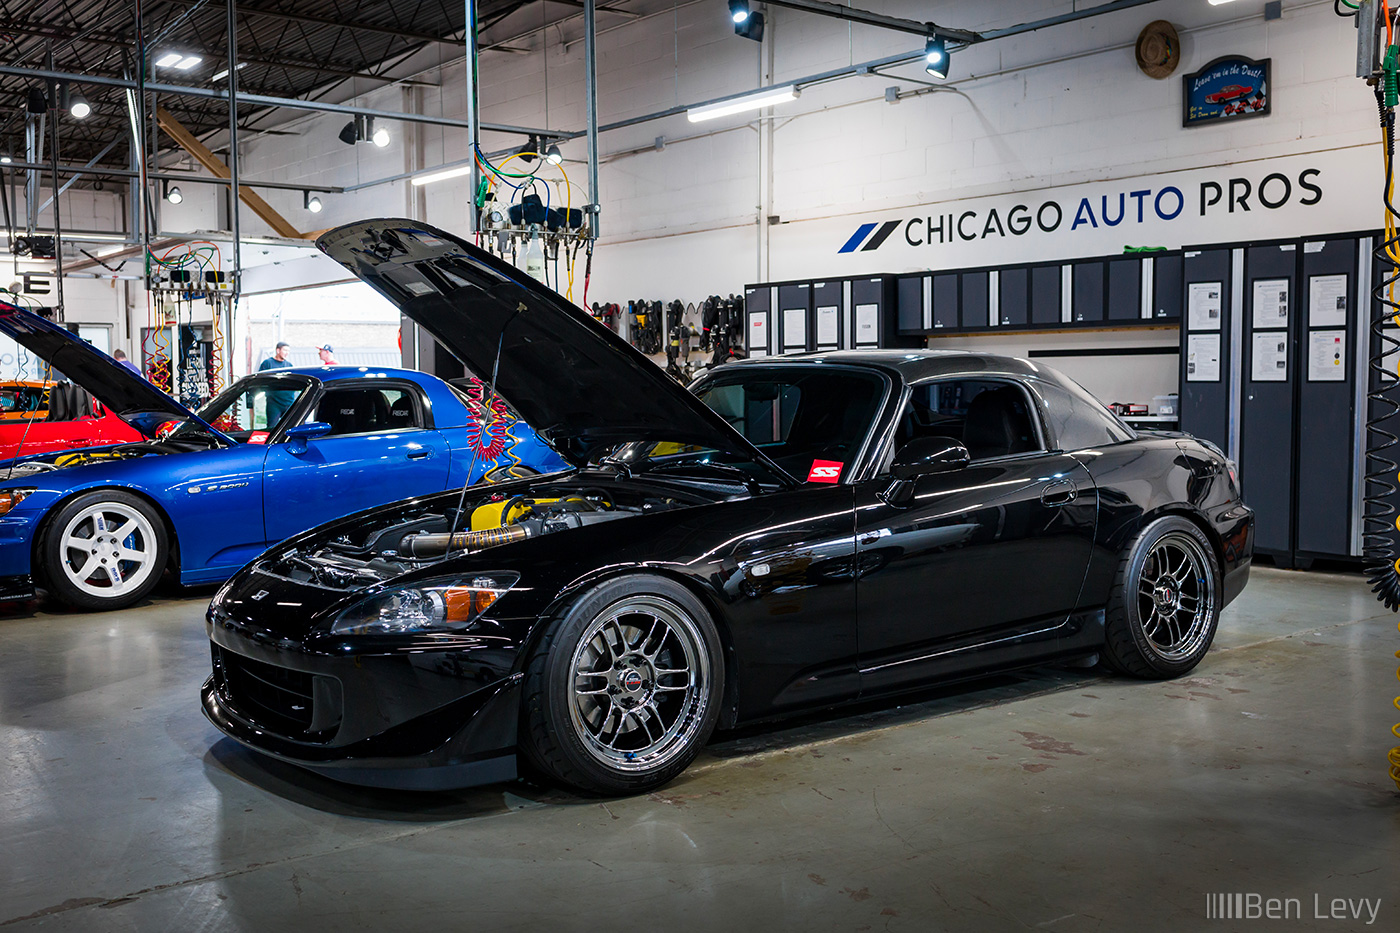 Black Honda S2000 at a bay in Chicago Auto Pros Lombard